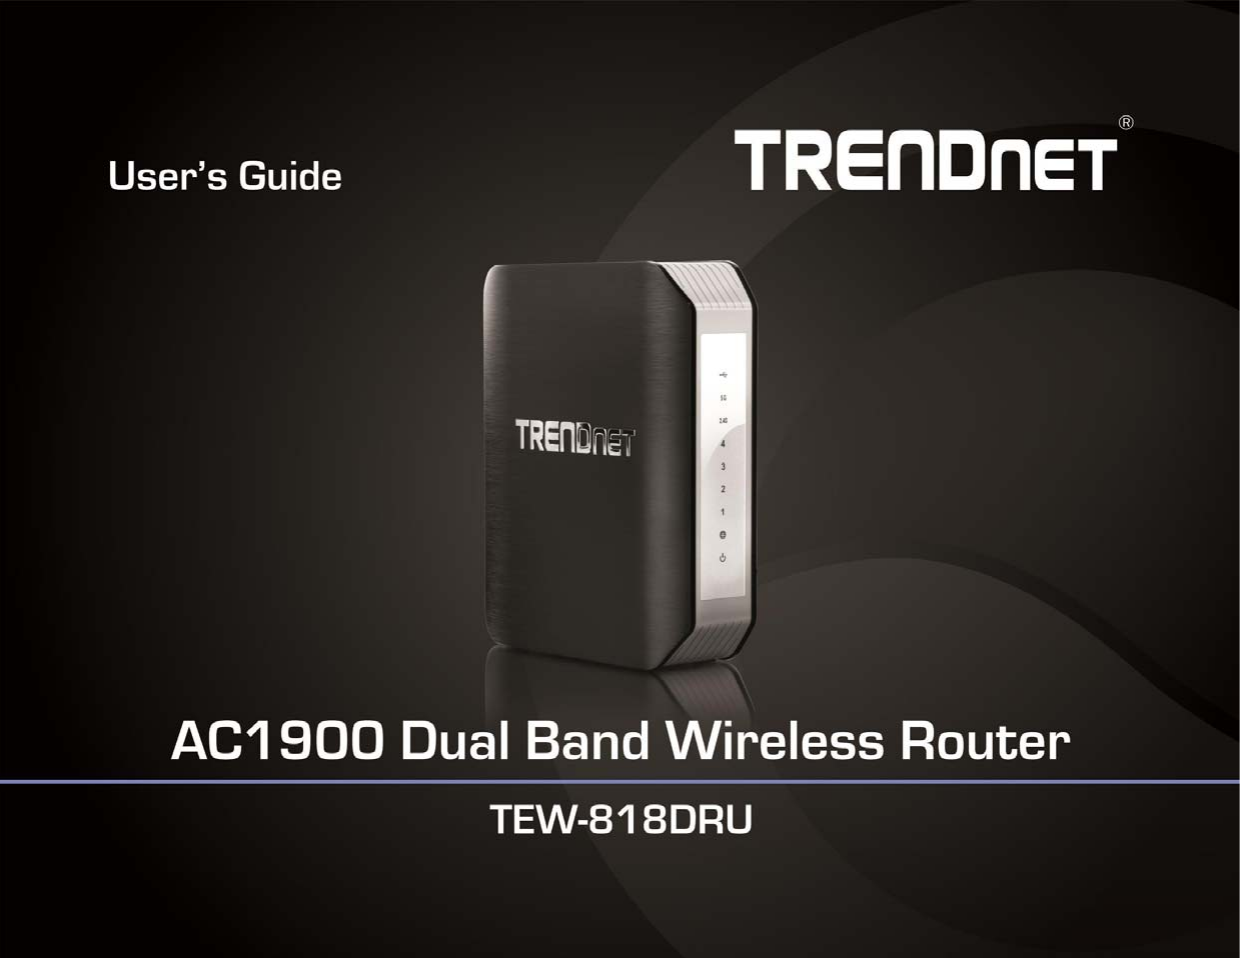              TRENDnet User’s Guide Cover Page  